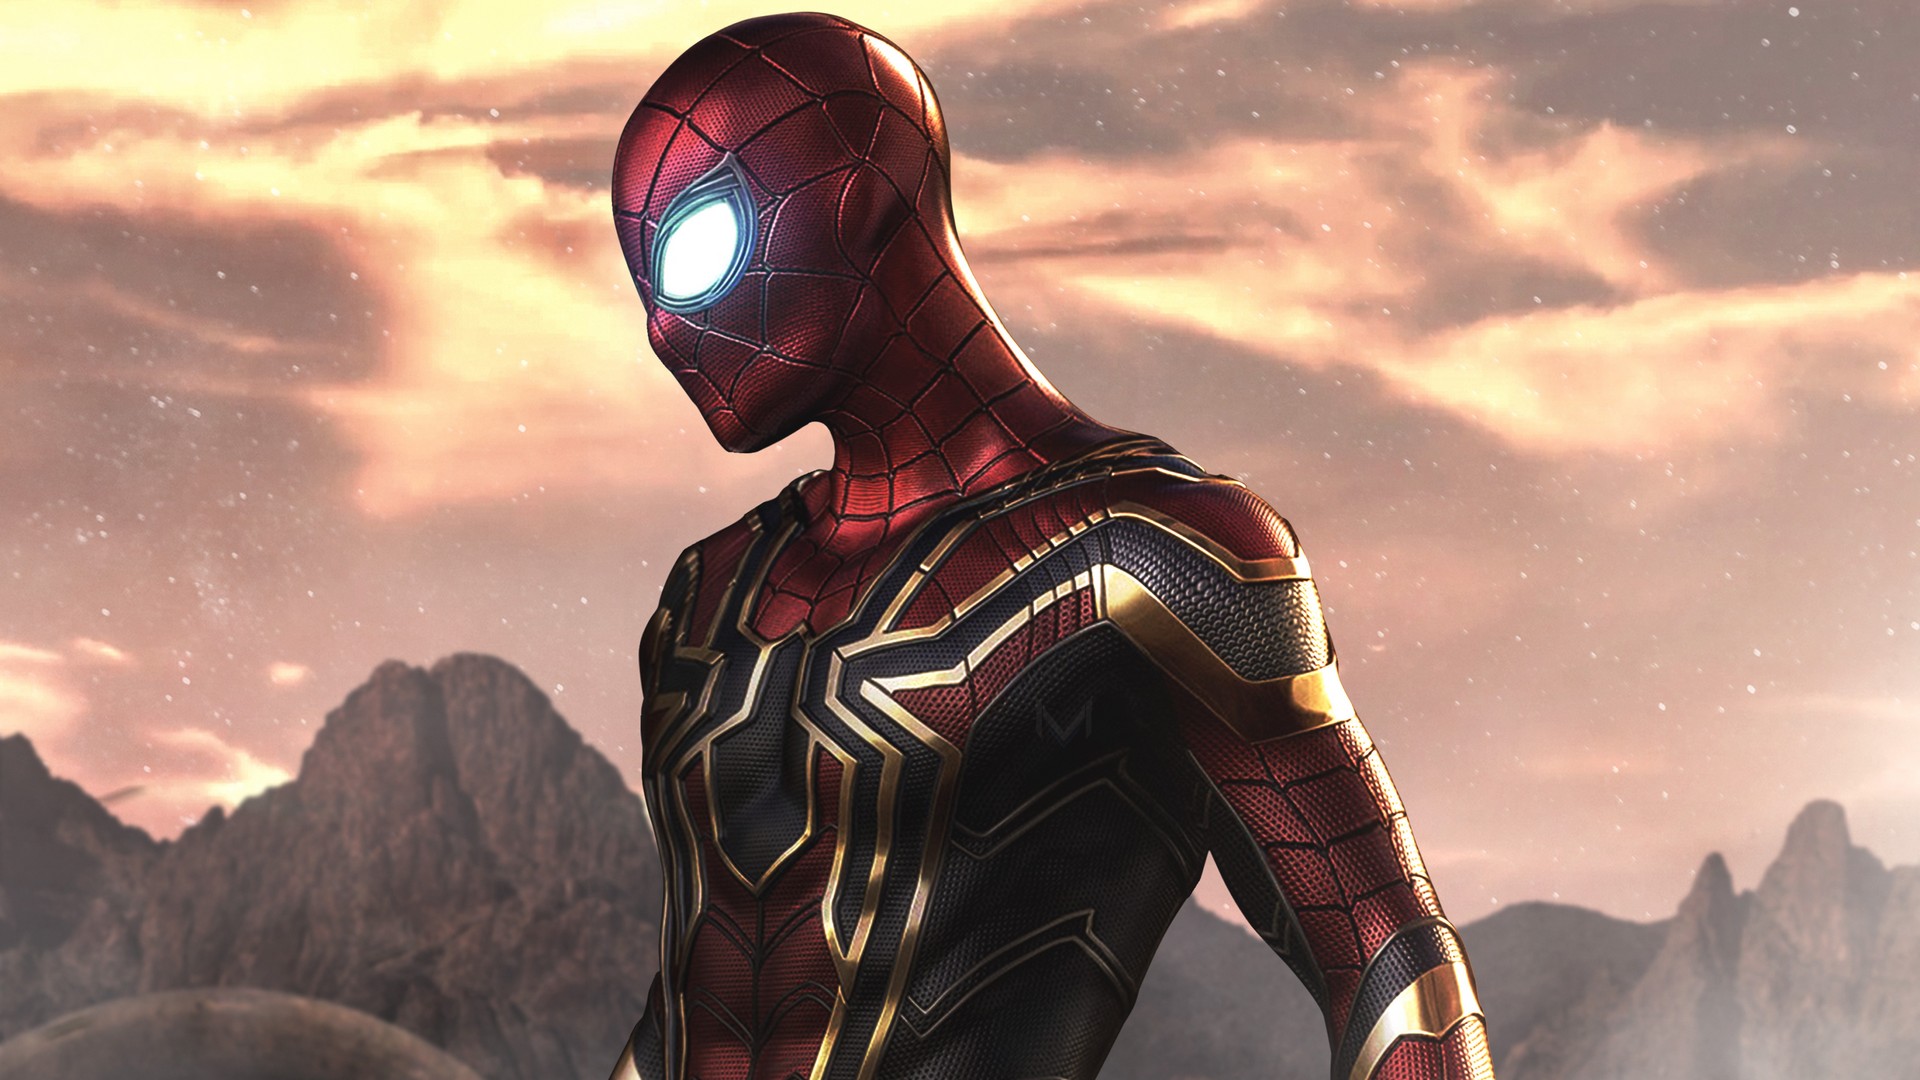 Spider-Man 2019 Far From Home Wallpaper HD With high-resolution 1920X1080 pixel. You can use this wallpaper for your Desktop Computer Backgrounds, Mac Wallpapers, Android Lock screen or iPhone Screensavers and another smartphone device